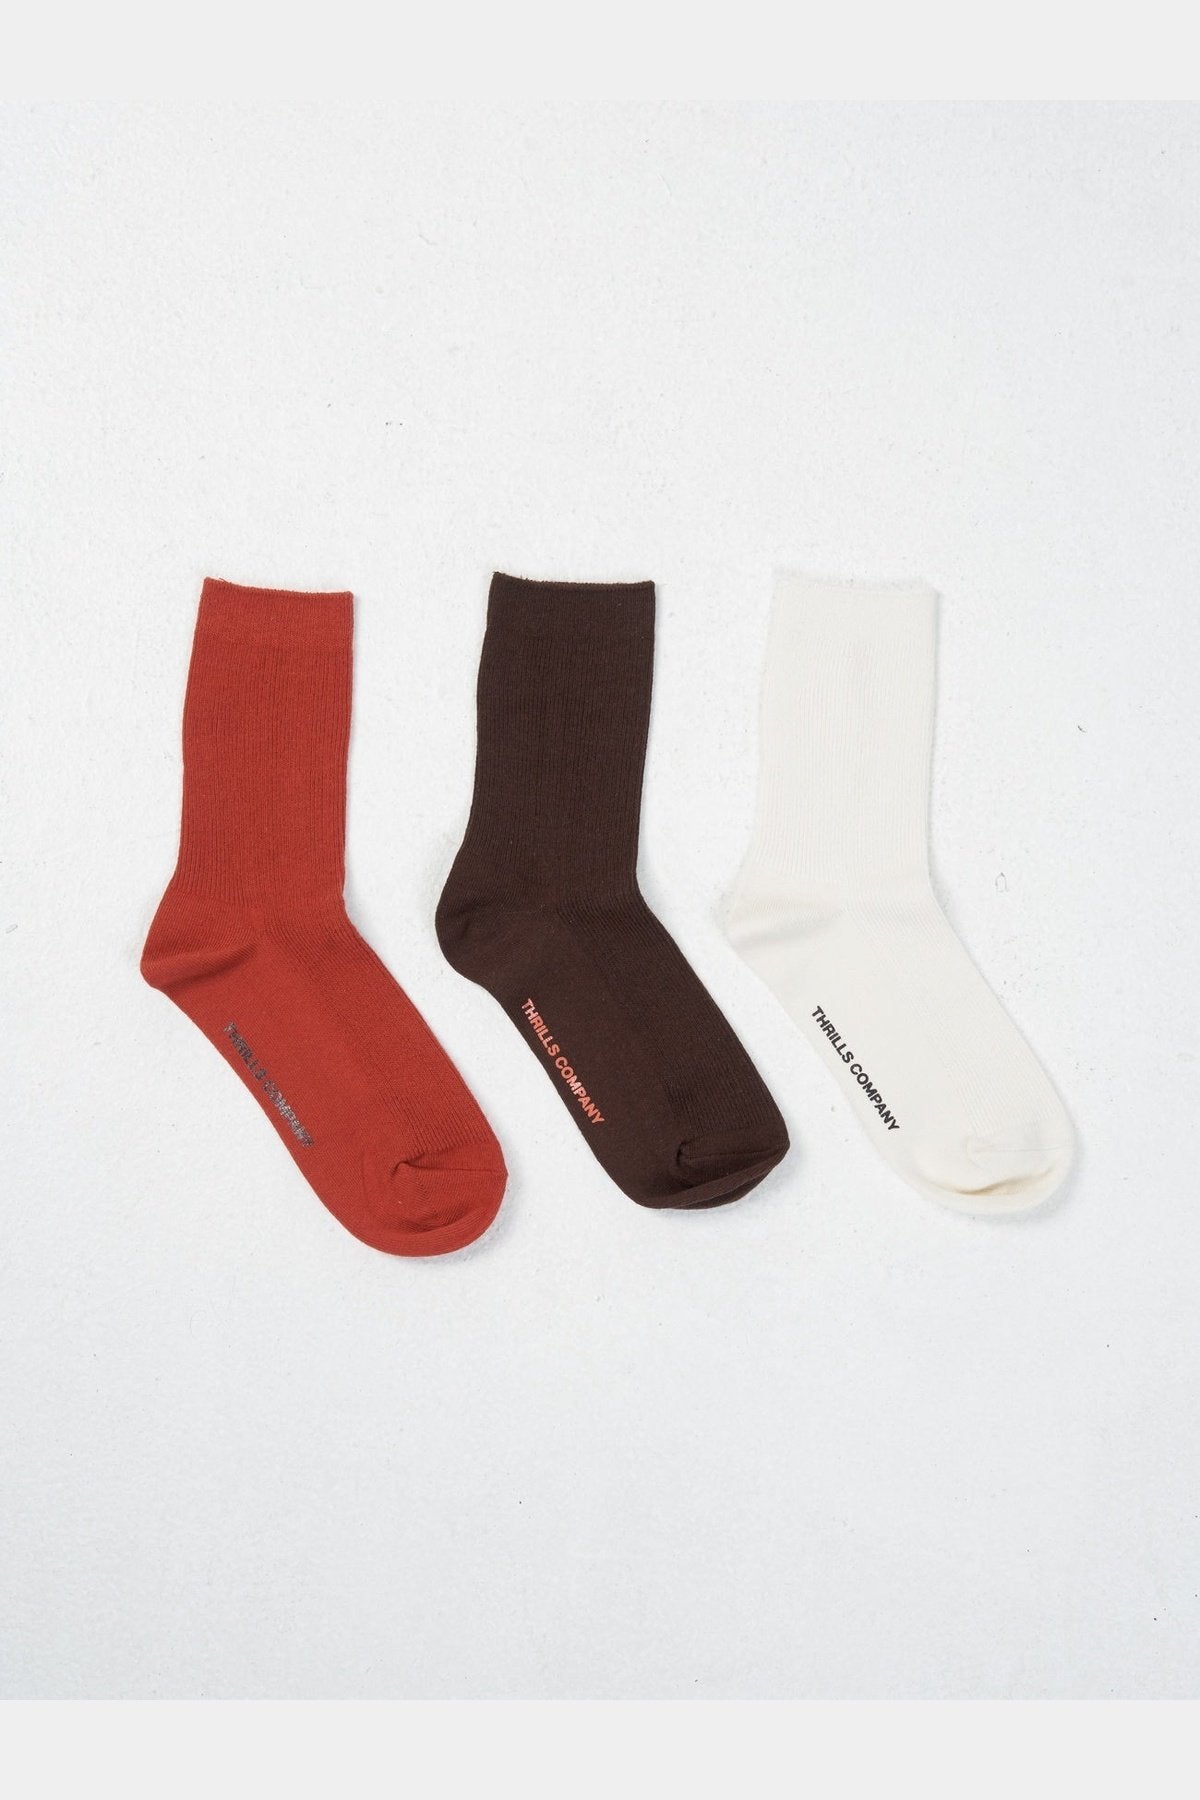 Thrills Natural Occurences 3Pk Sock - Ketchup, Choc Plum, Heritage White